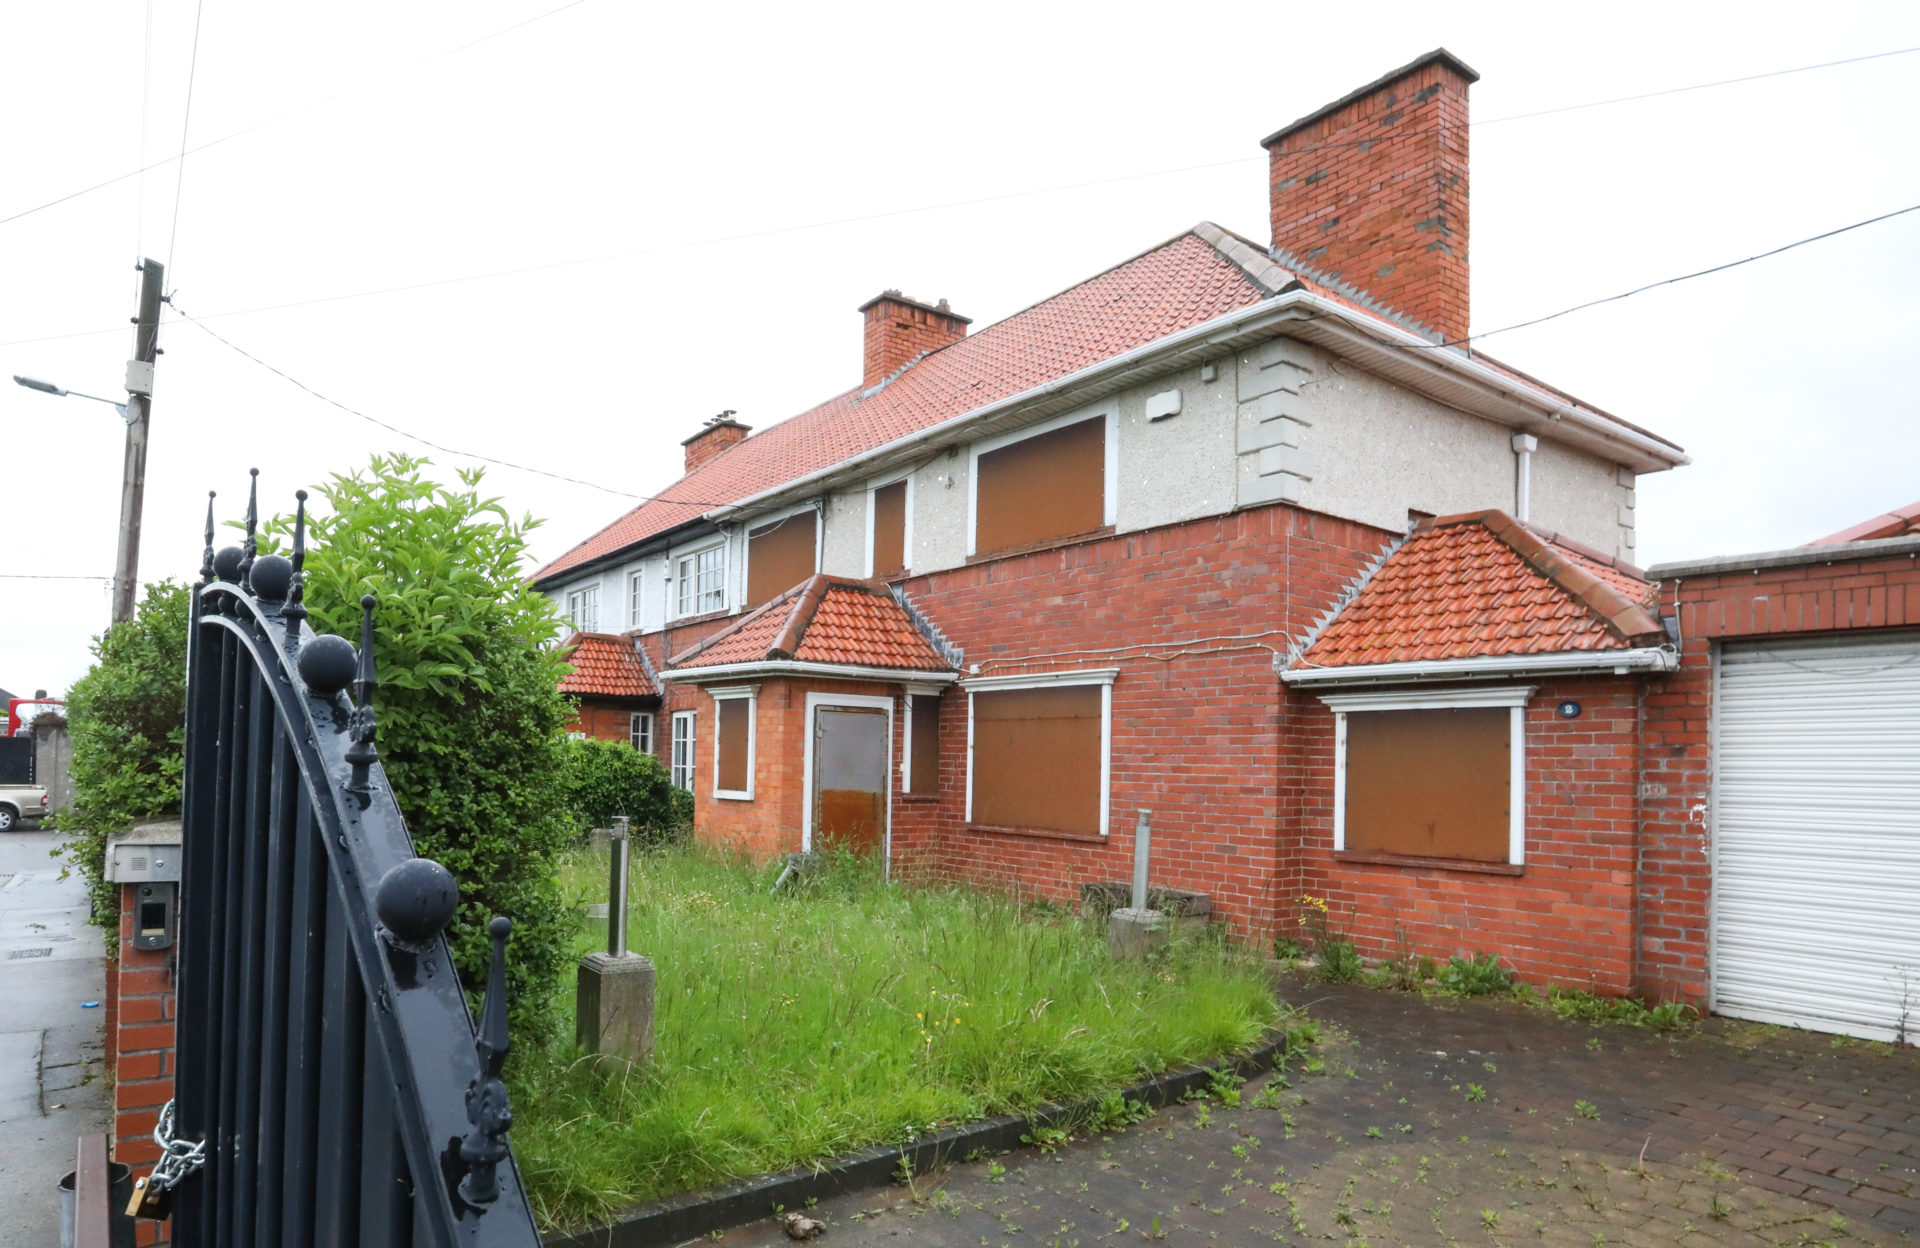 The house seized by the Criminal Assets Bureau in Crumlin from senior Kinahan associate Liam Byrne, 28/05/2021